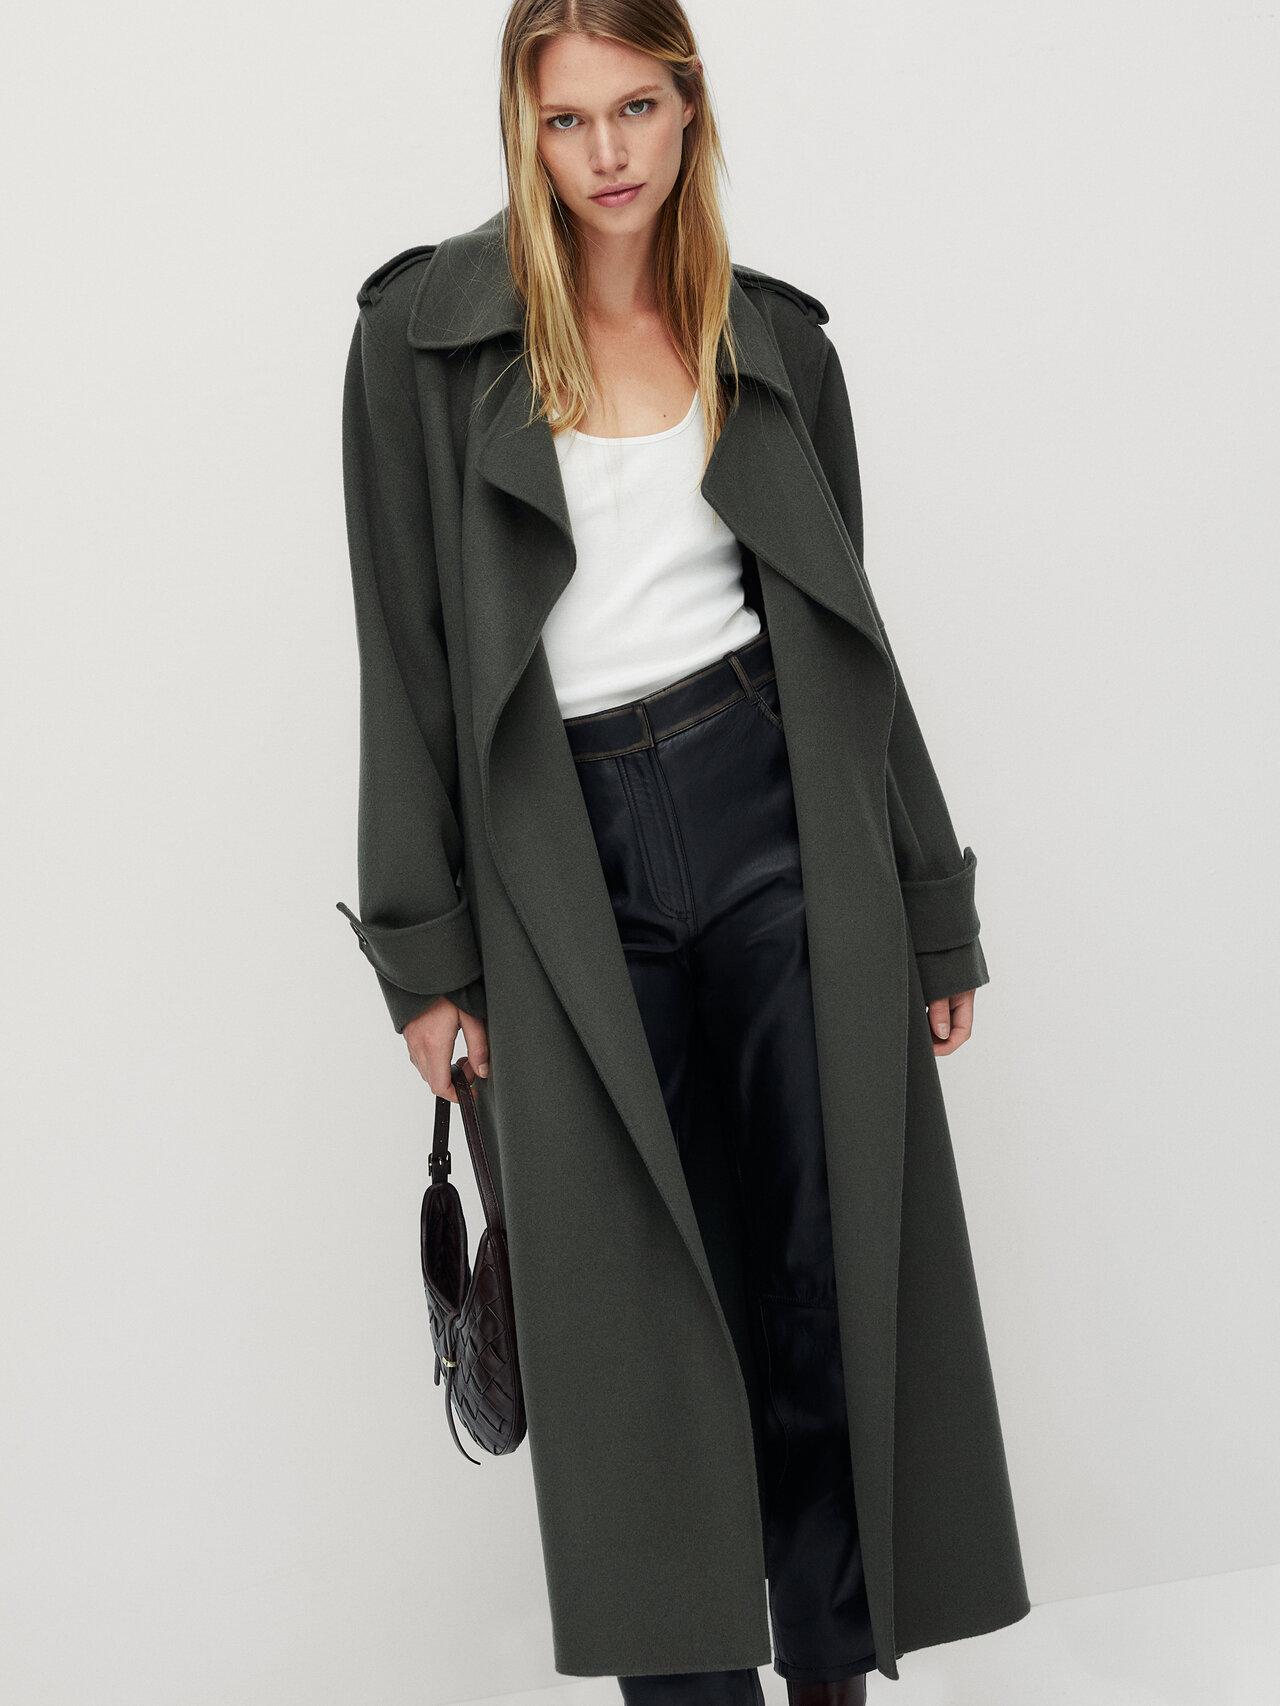 MASSIMO DUTTI Green Wool Blend Trench-style Jacket | Lyst